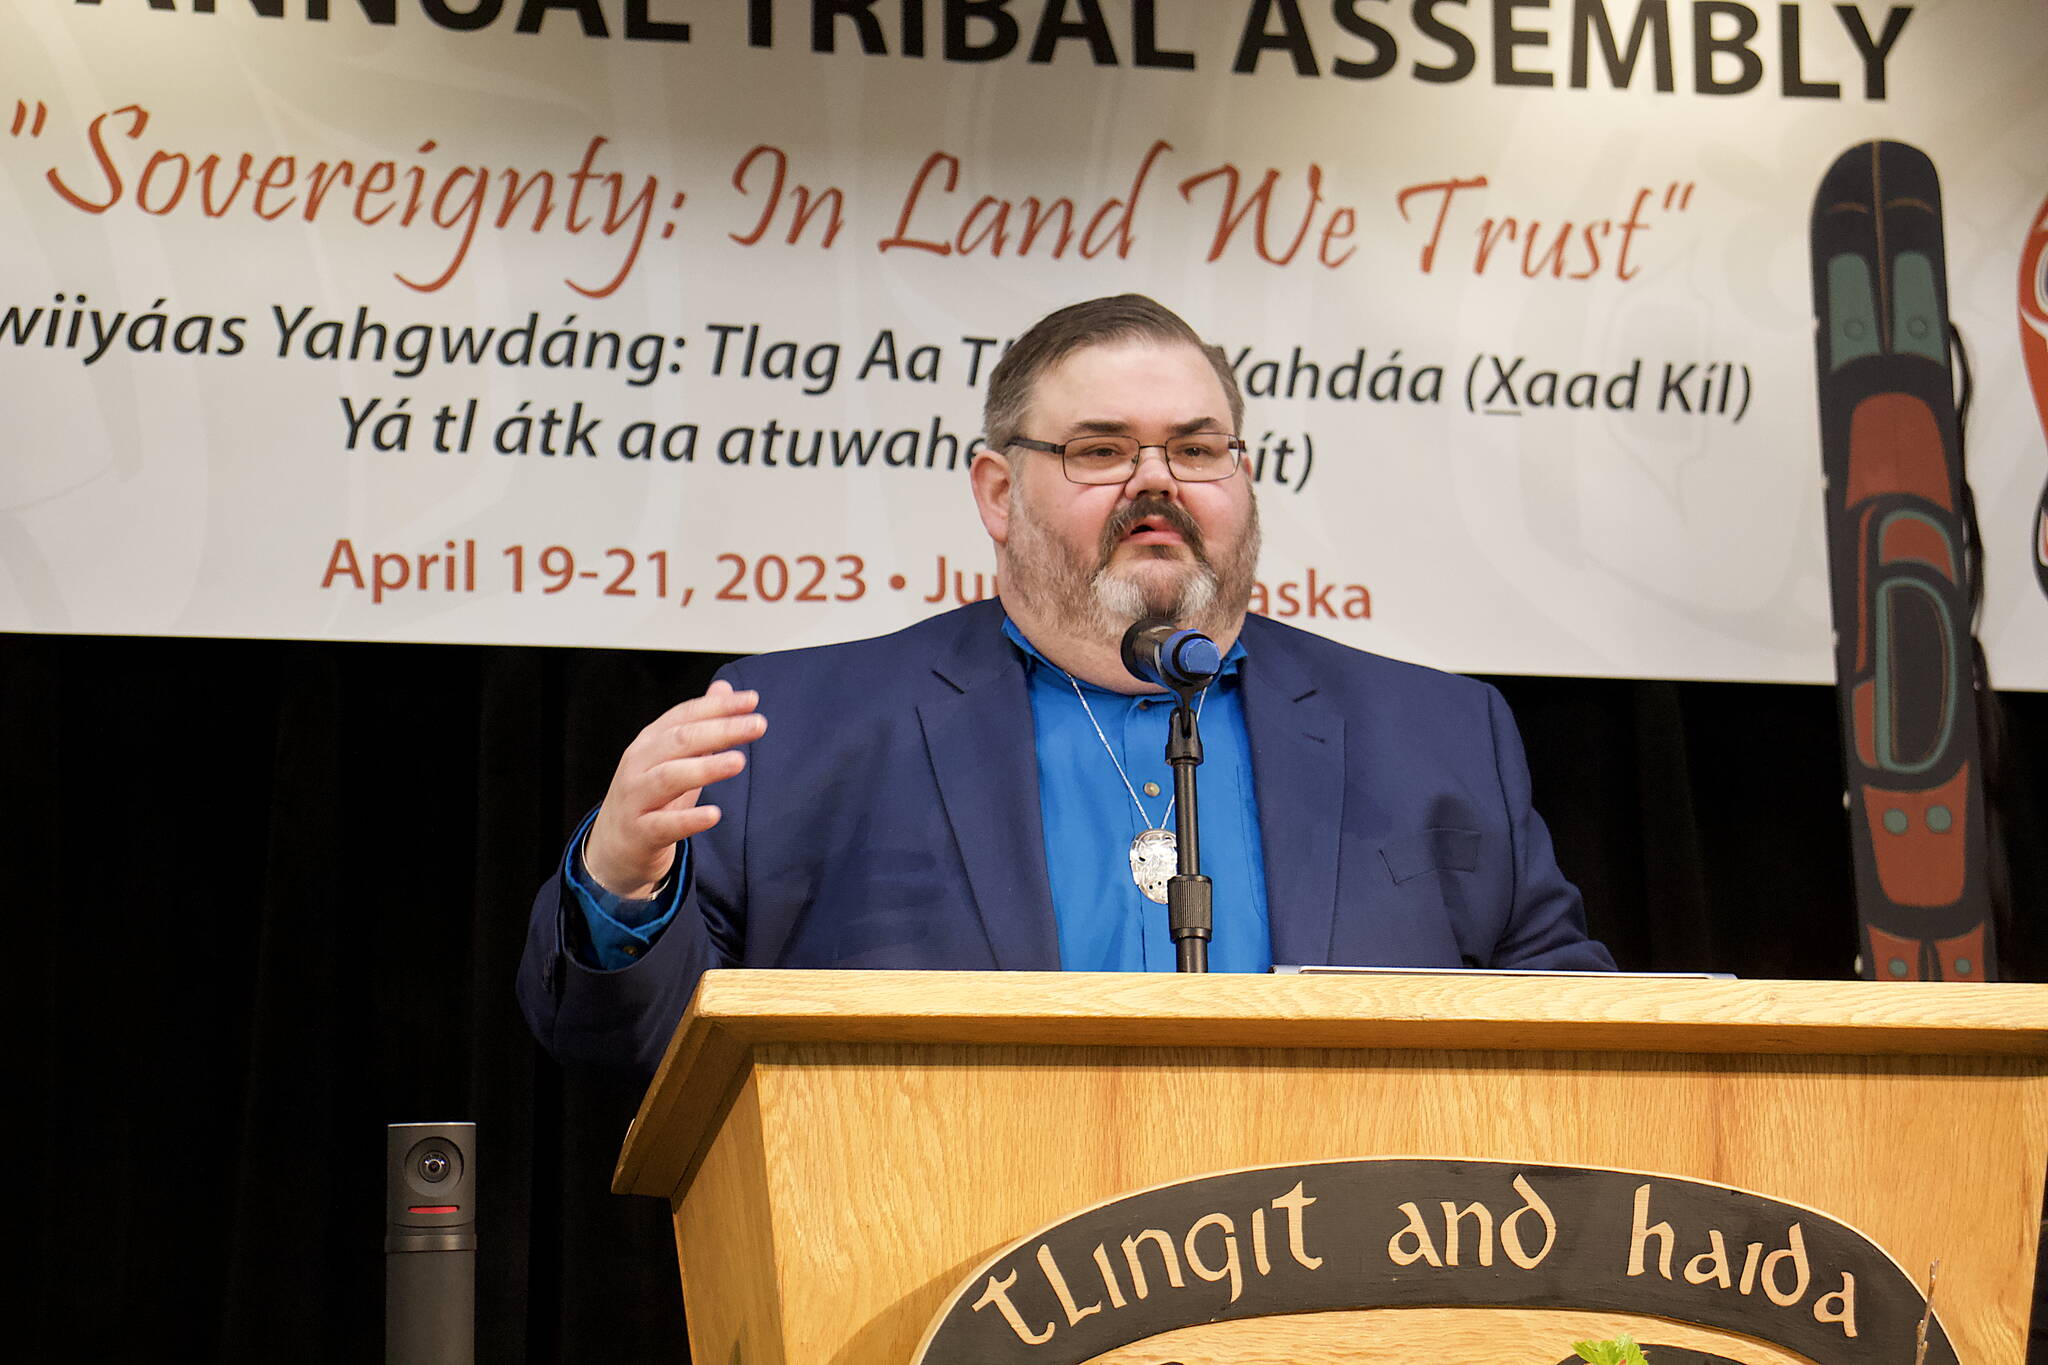 Richard Chalyee Éesh Peterson, president of the Central Council of the Tlingit and Haida Indian Tribes of Alaska, discusses recent political and societal developments during his State of the Tribe Address at the annual tribal assembly on Wednesday at Elizabeth Peratrovich Hall. (Mark Sabbatini / Juneau Empire)